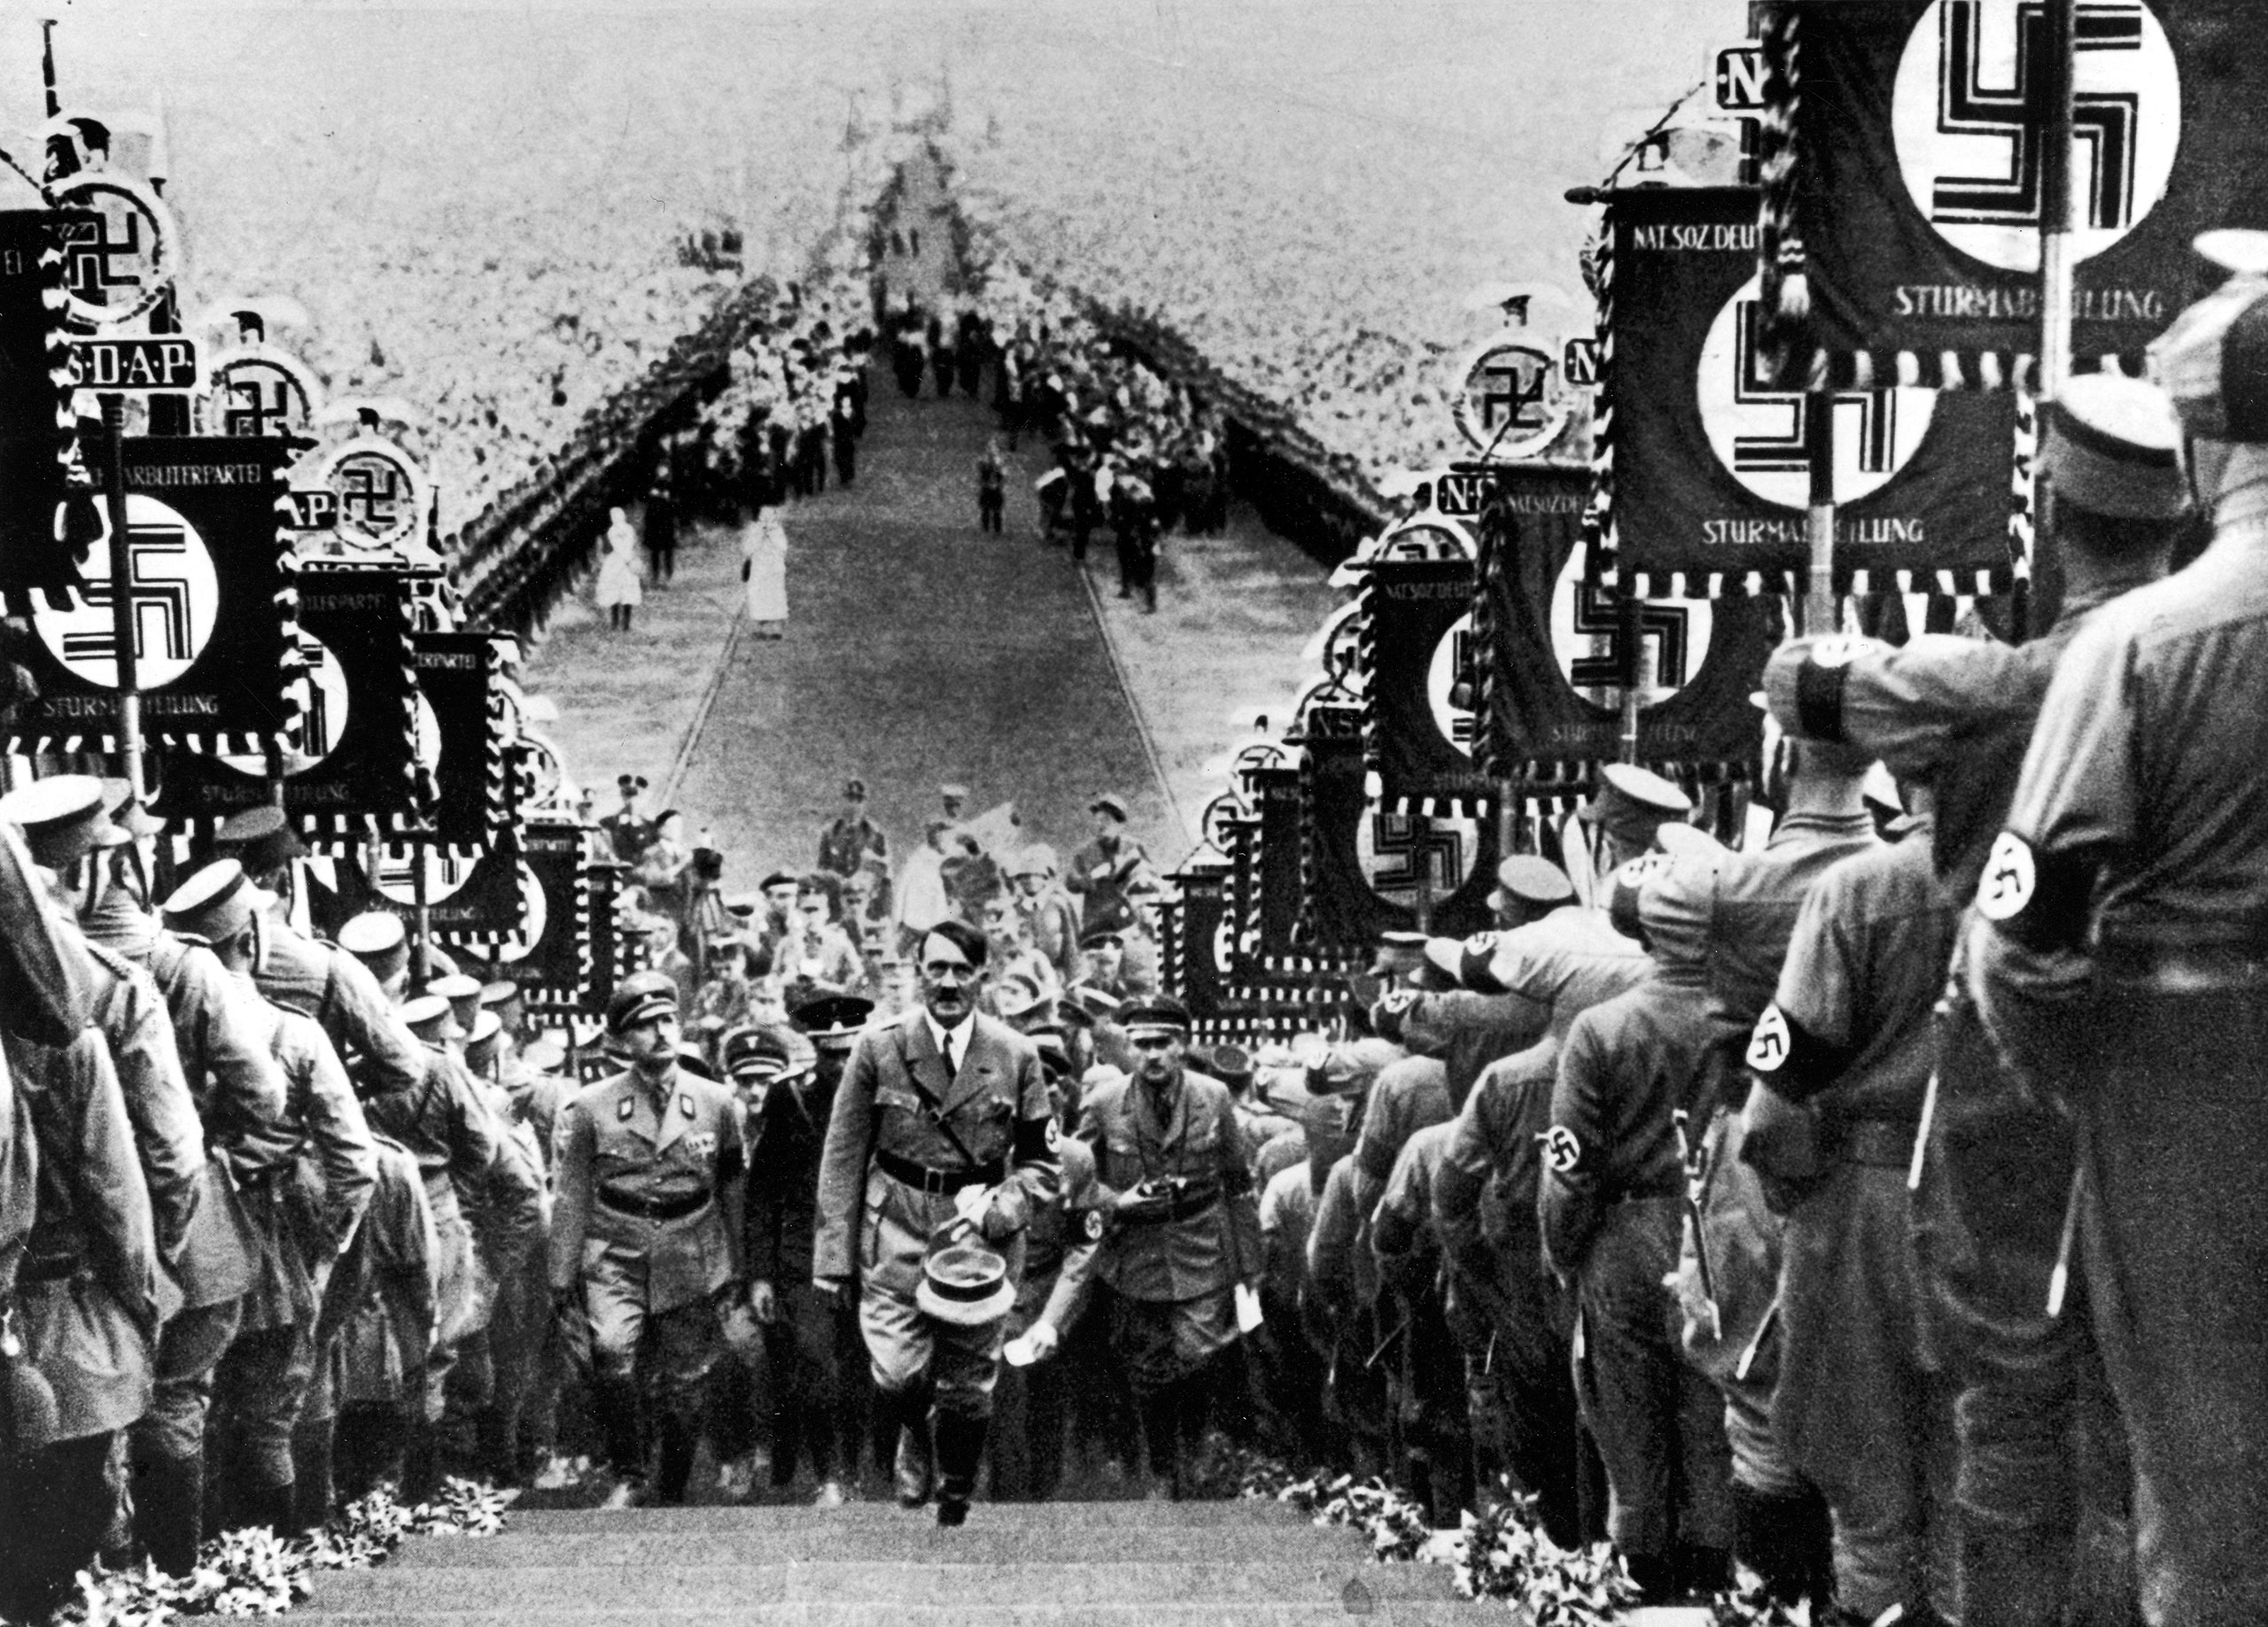 Hitler at a Nazi Party Rally by Heinrich Hoffmann, 1934.